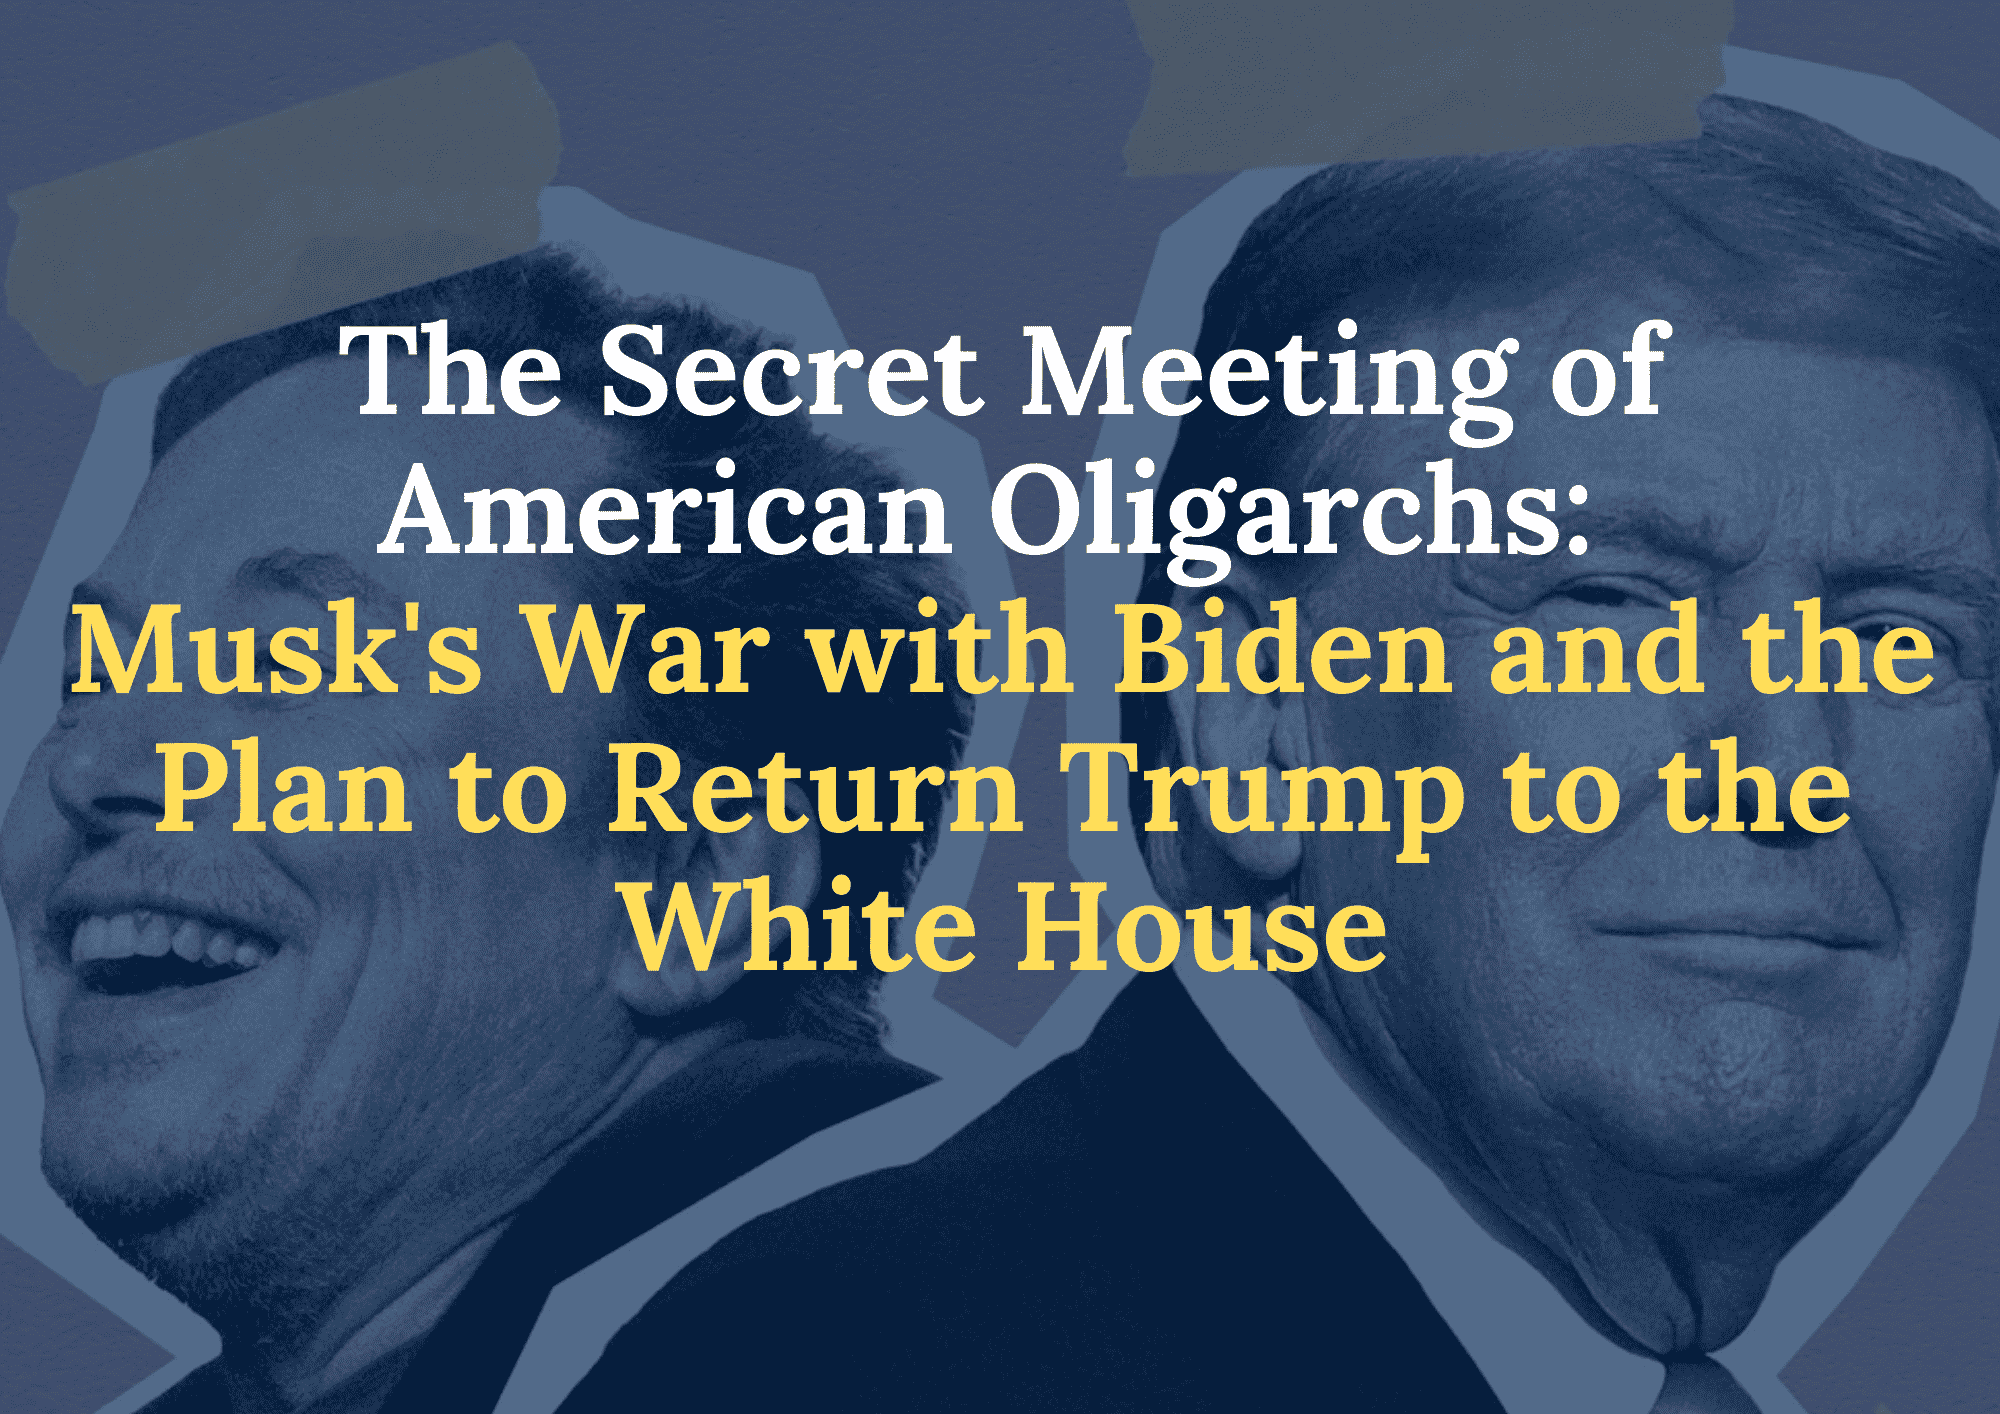 The Secret Meeting of American Oligarchs: Musk's War with Biden and the Plan to Return Trump to the White House